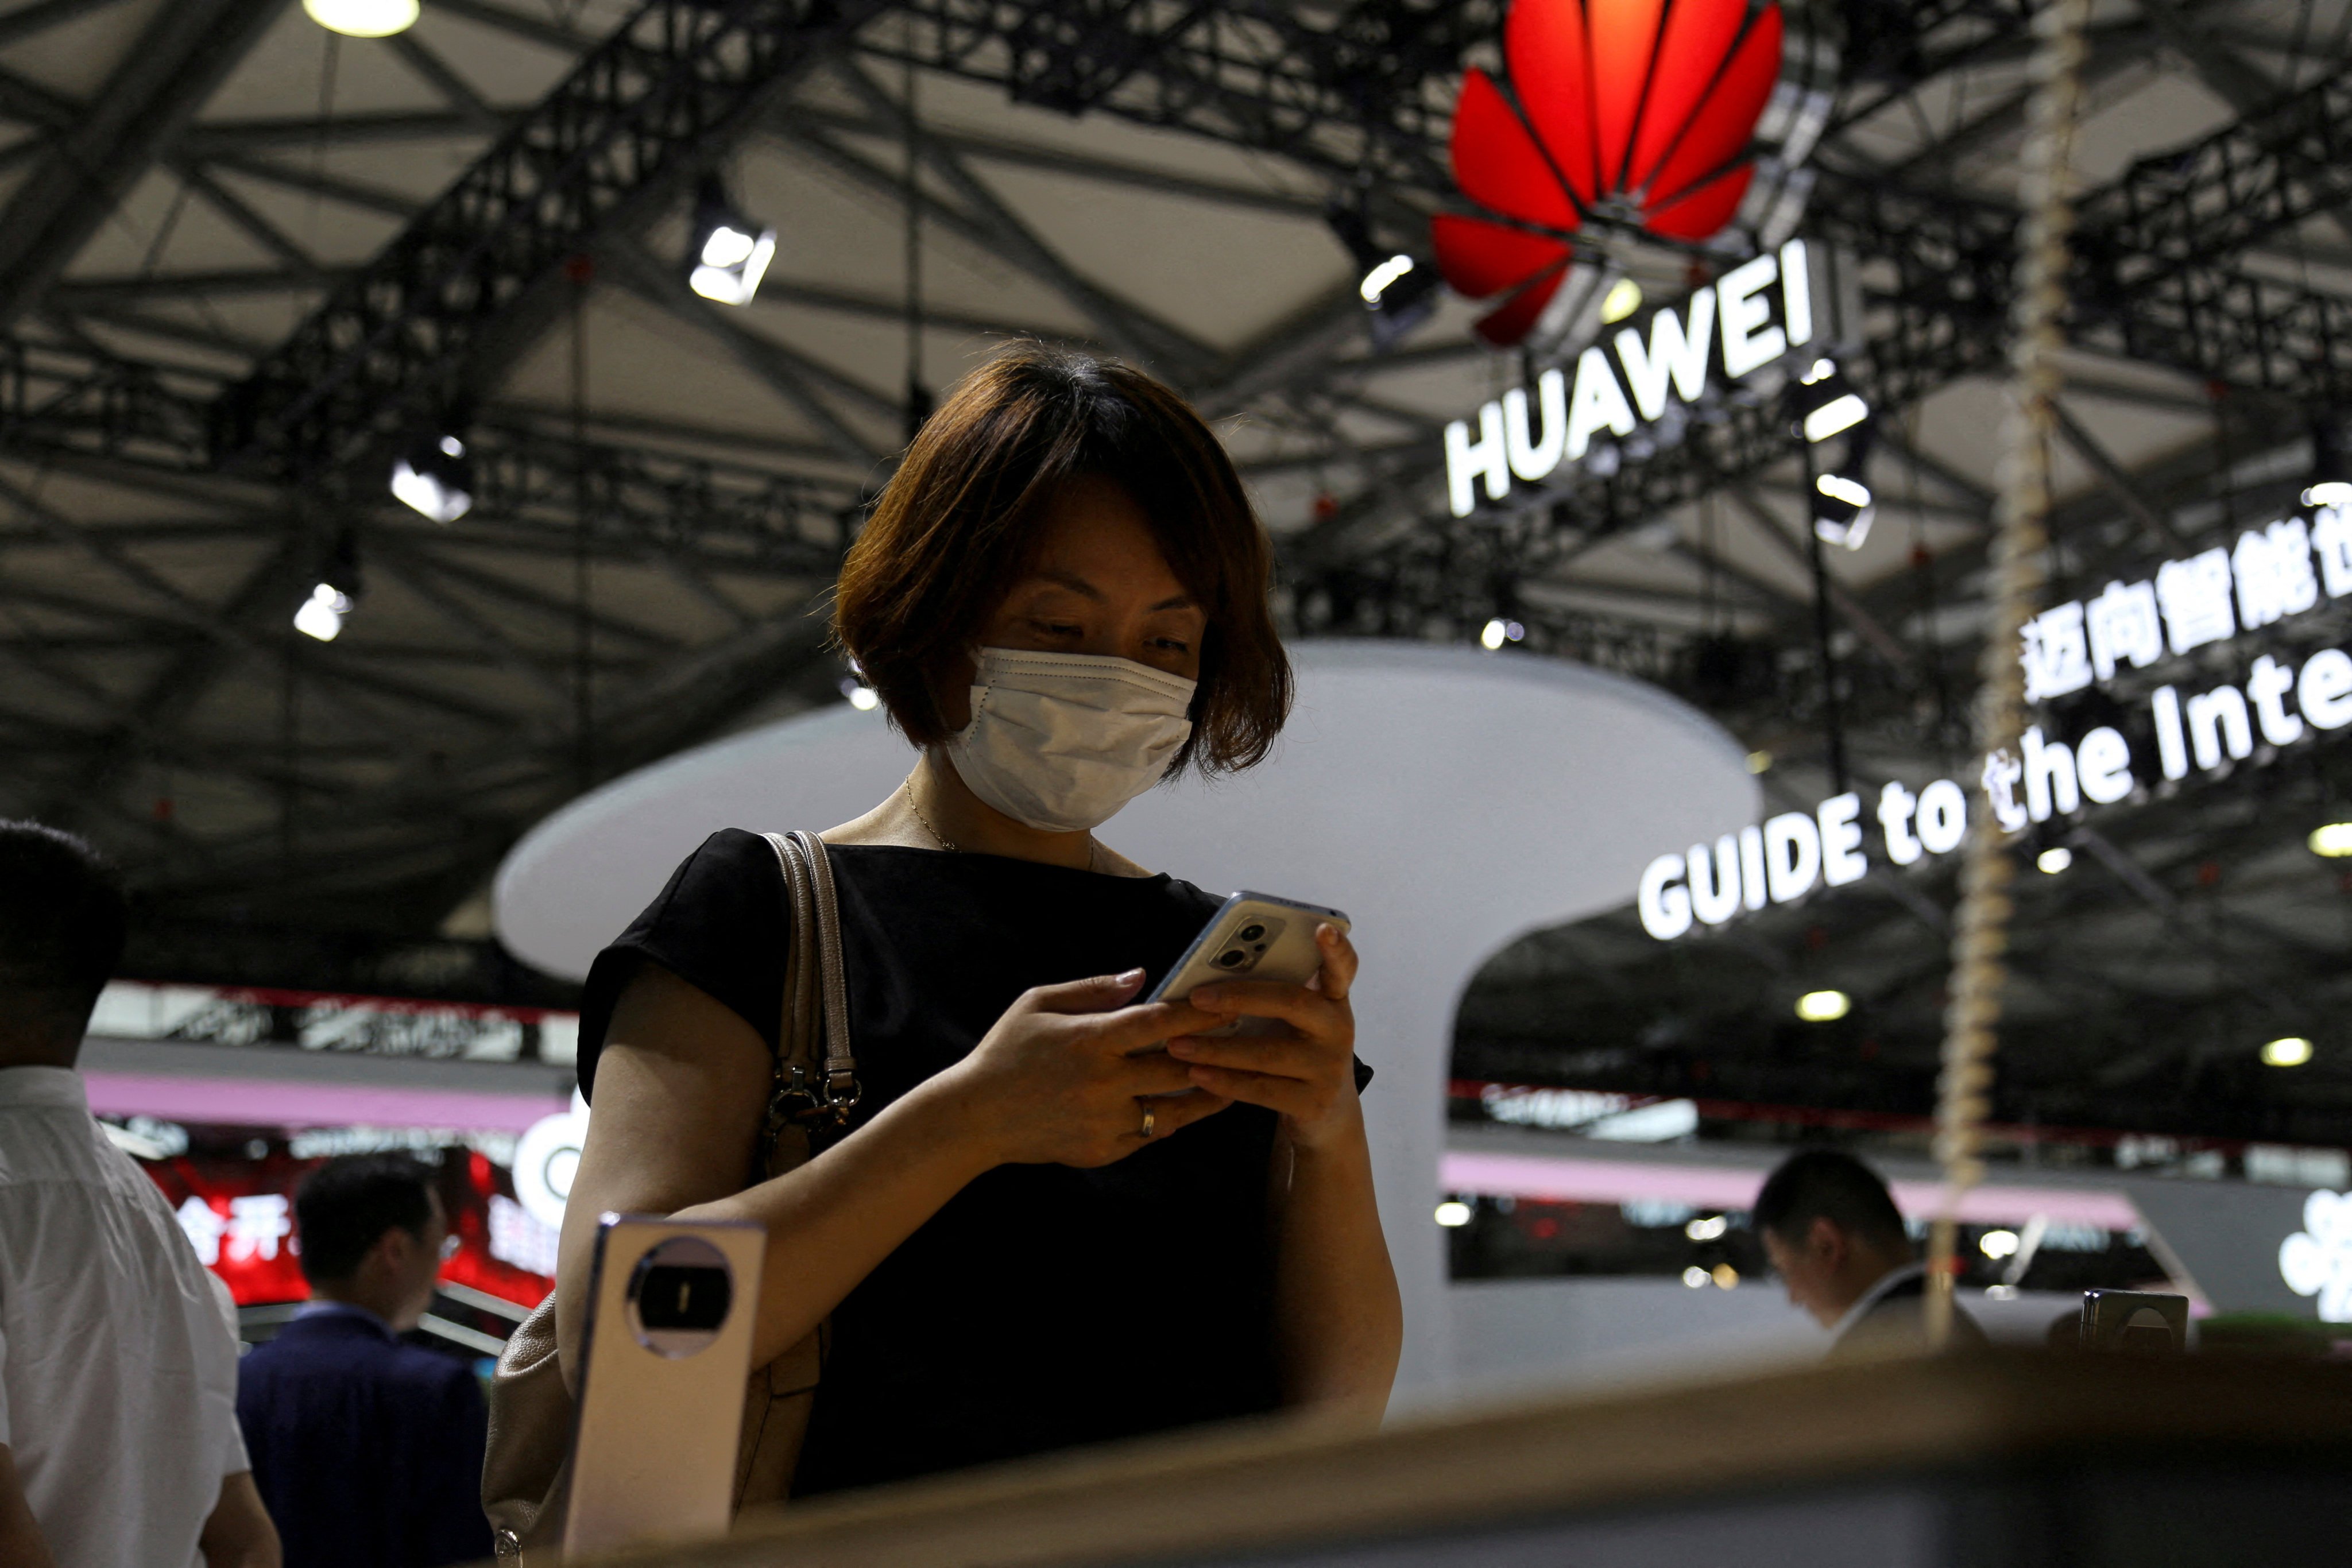 The Huawei logo seen at the Mobile World Congress in Shanghai in June. Photo: Reuters